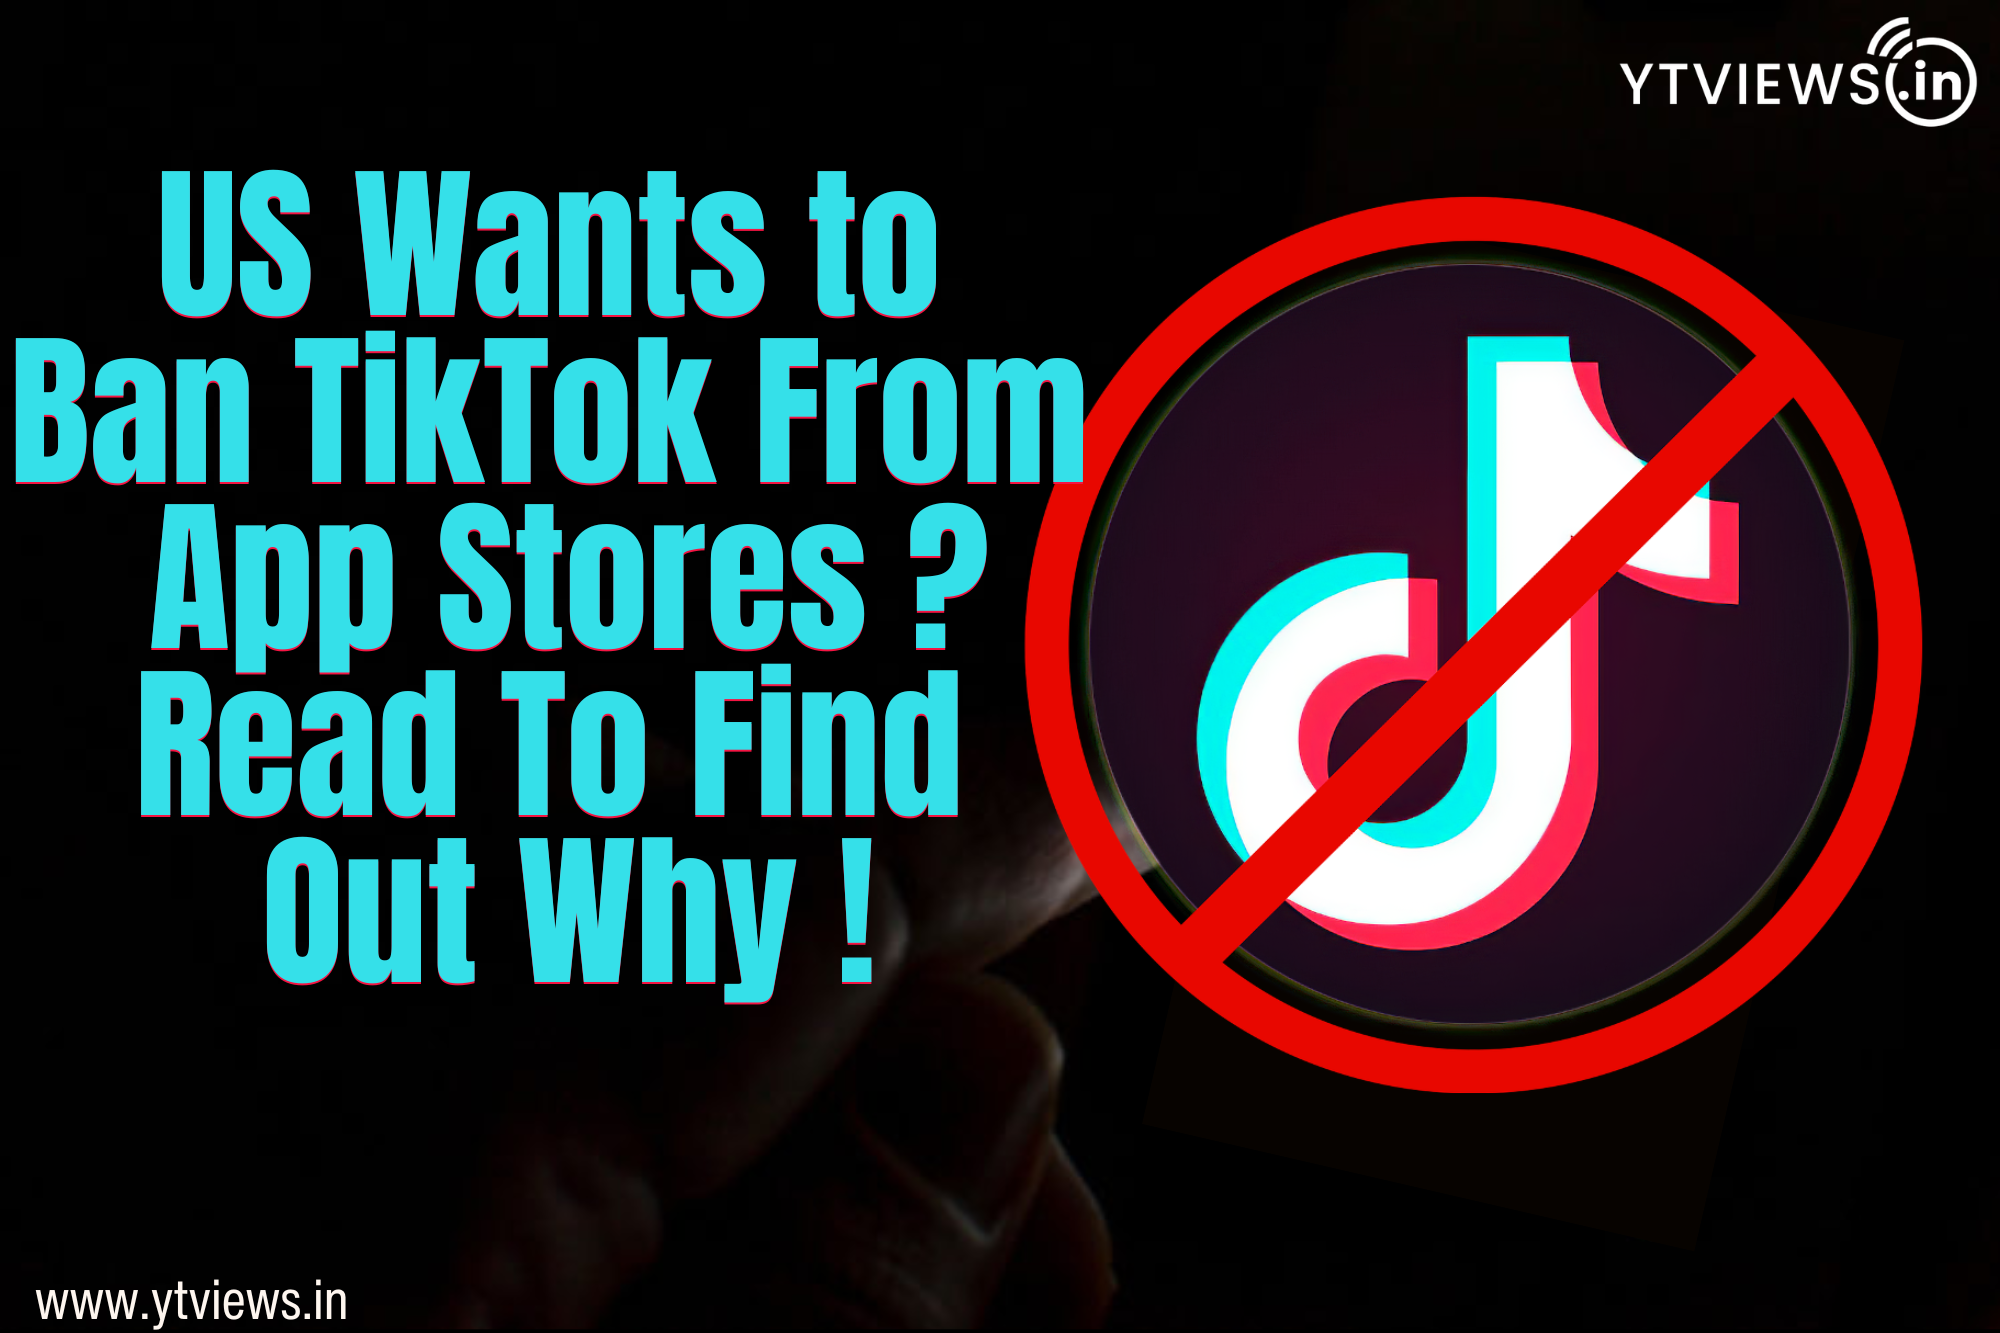 U.S. Wants To Ban TikTok From App Stores? Read To Find Out Why